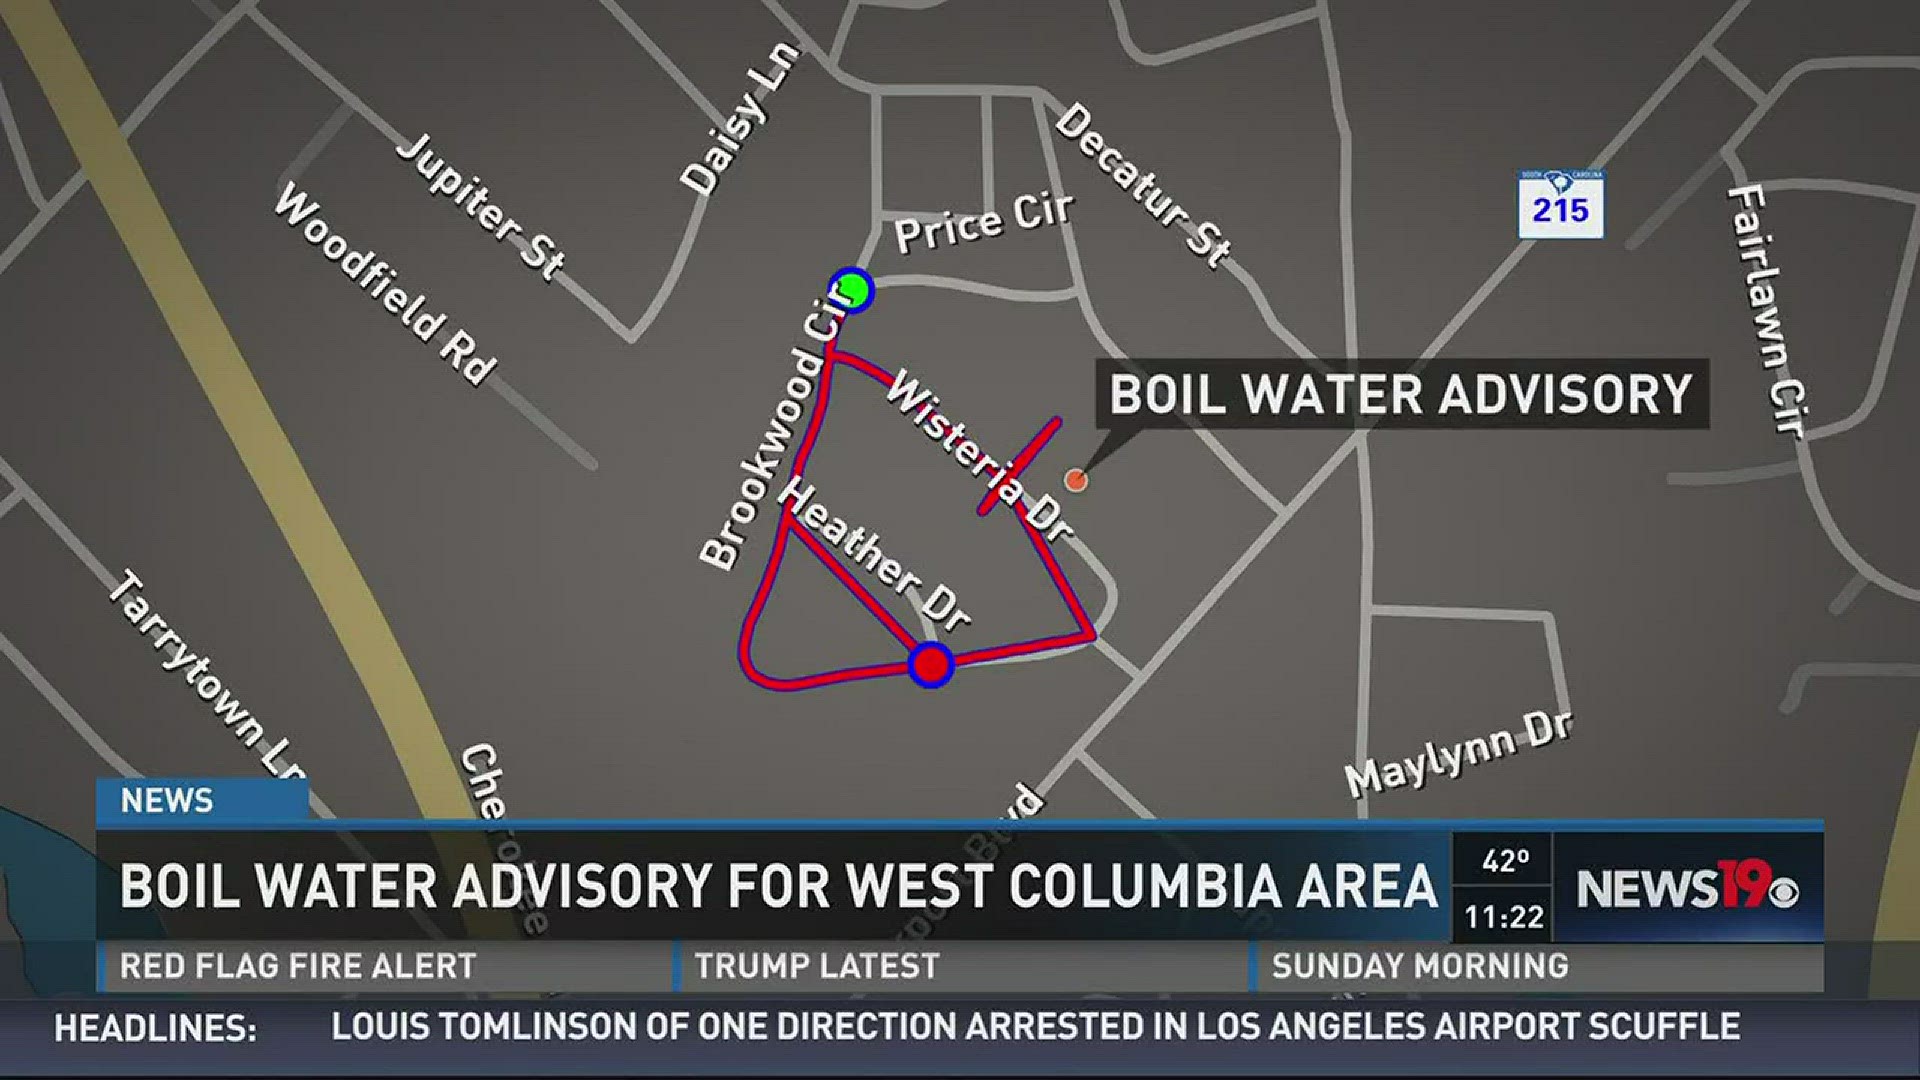 A Boil Water Advisory has been issued for an area in West Columbia.